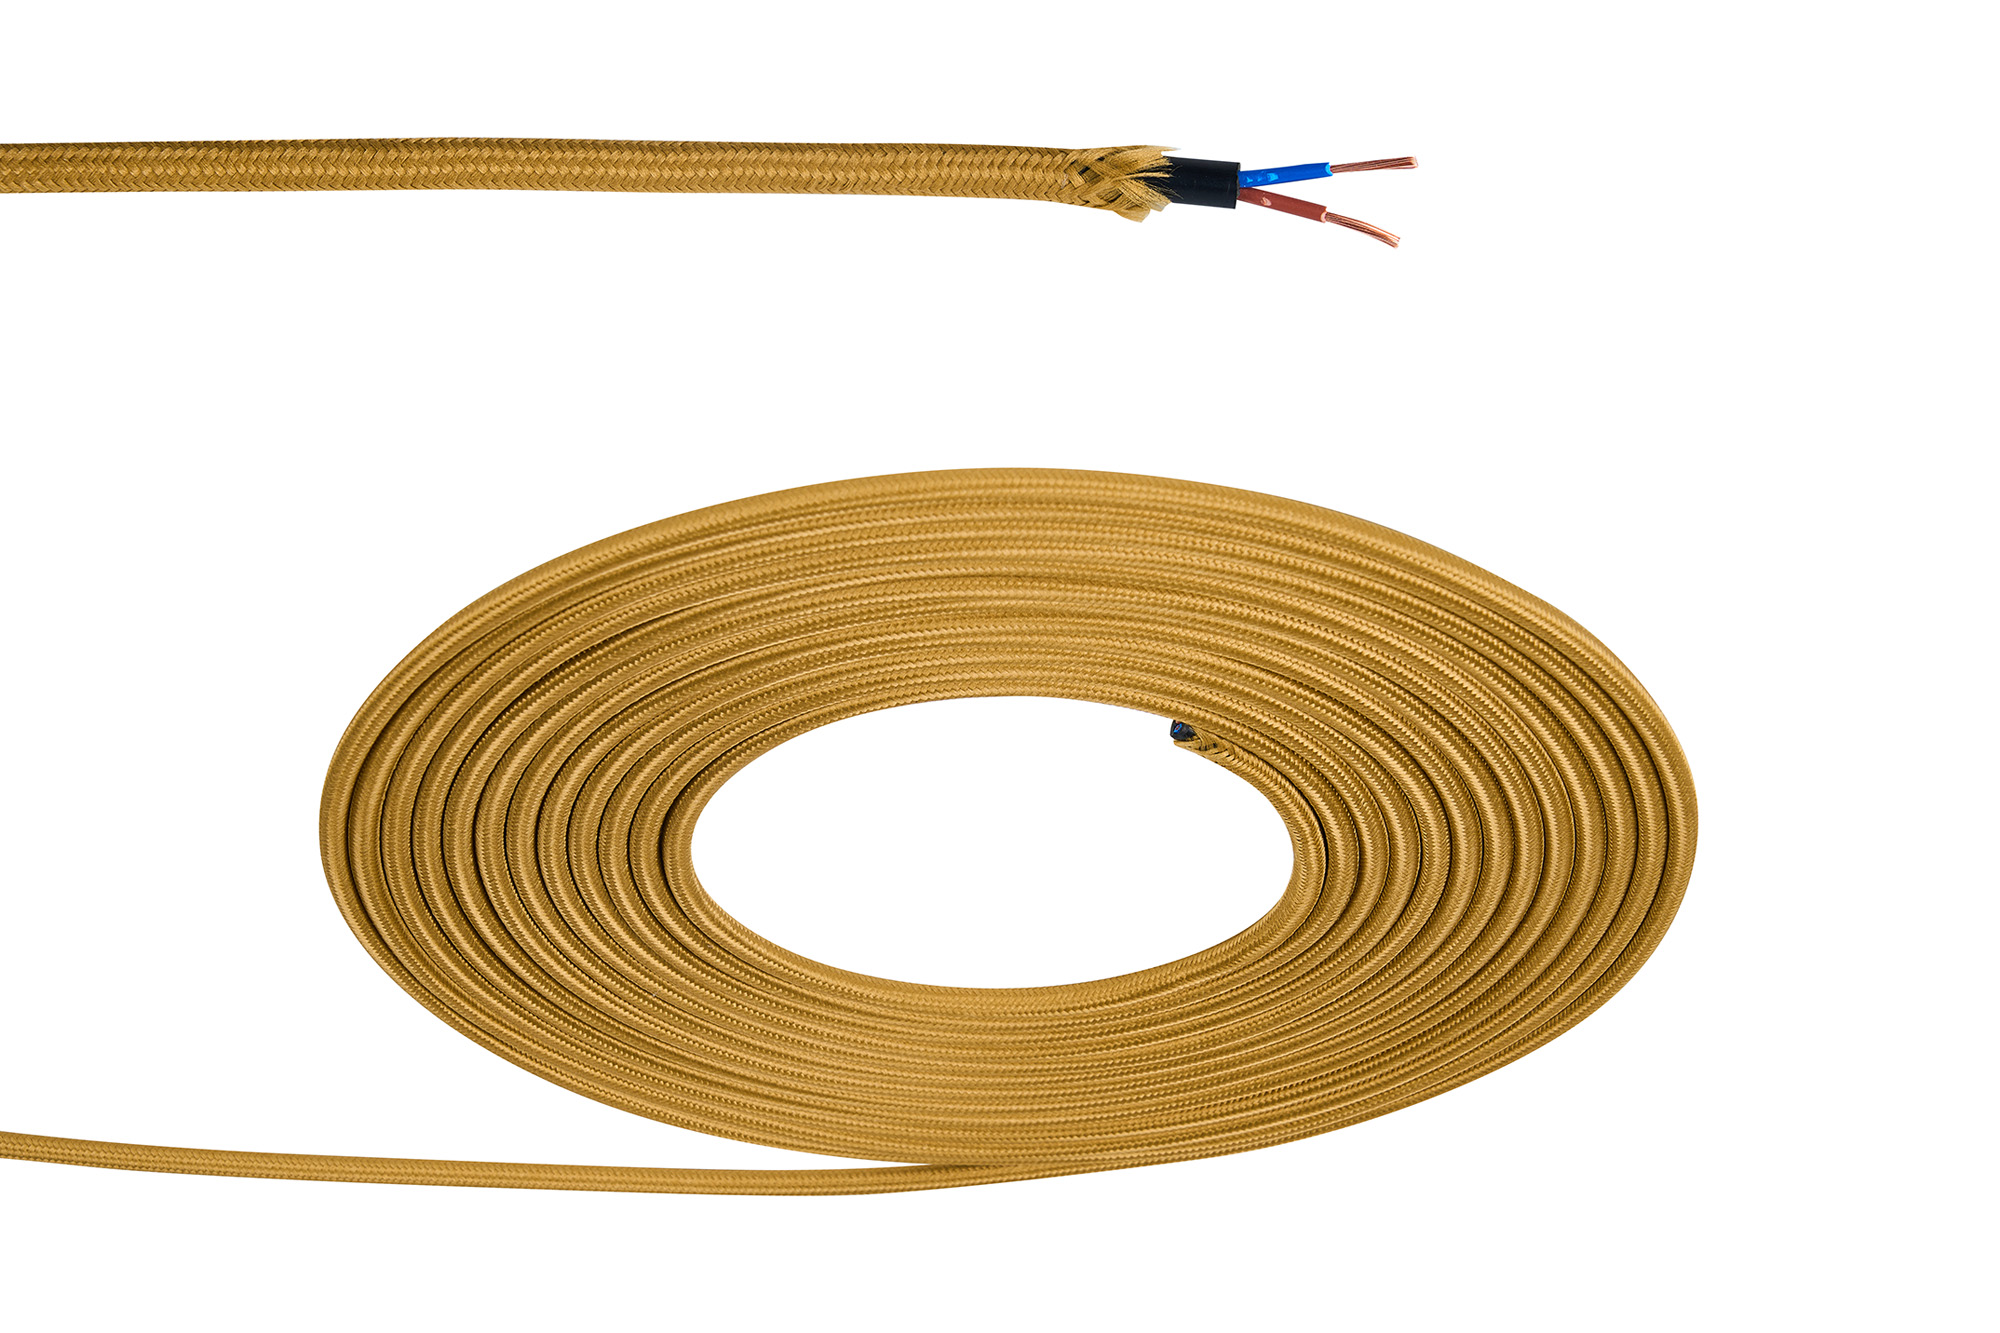 D0902  Cavo 1m Golden Brown Braided 2 Core 0.75mm Cable